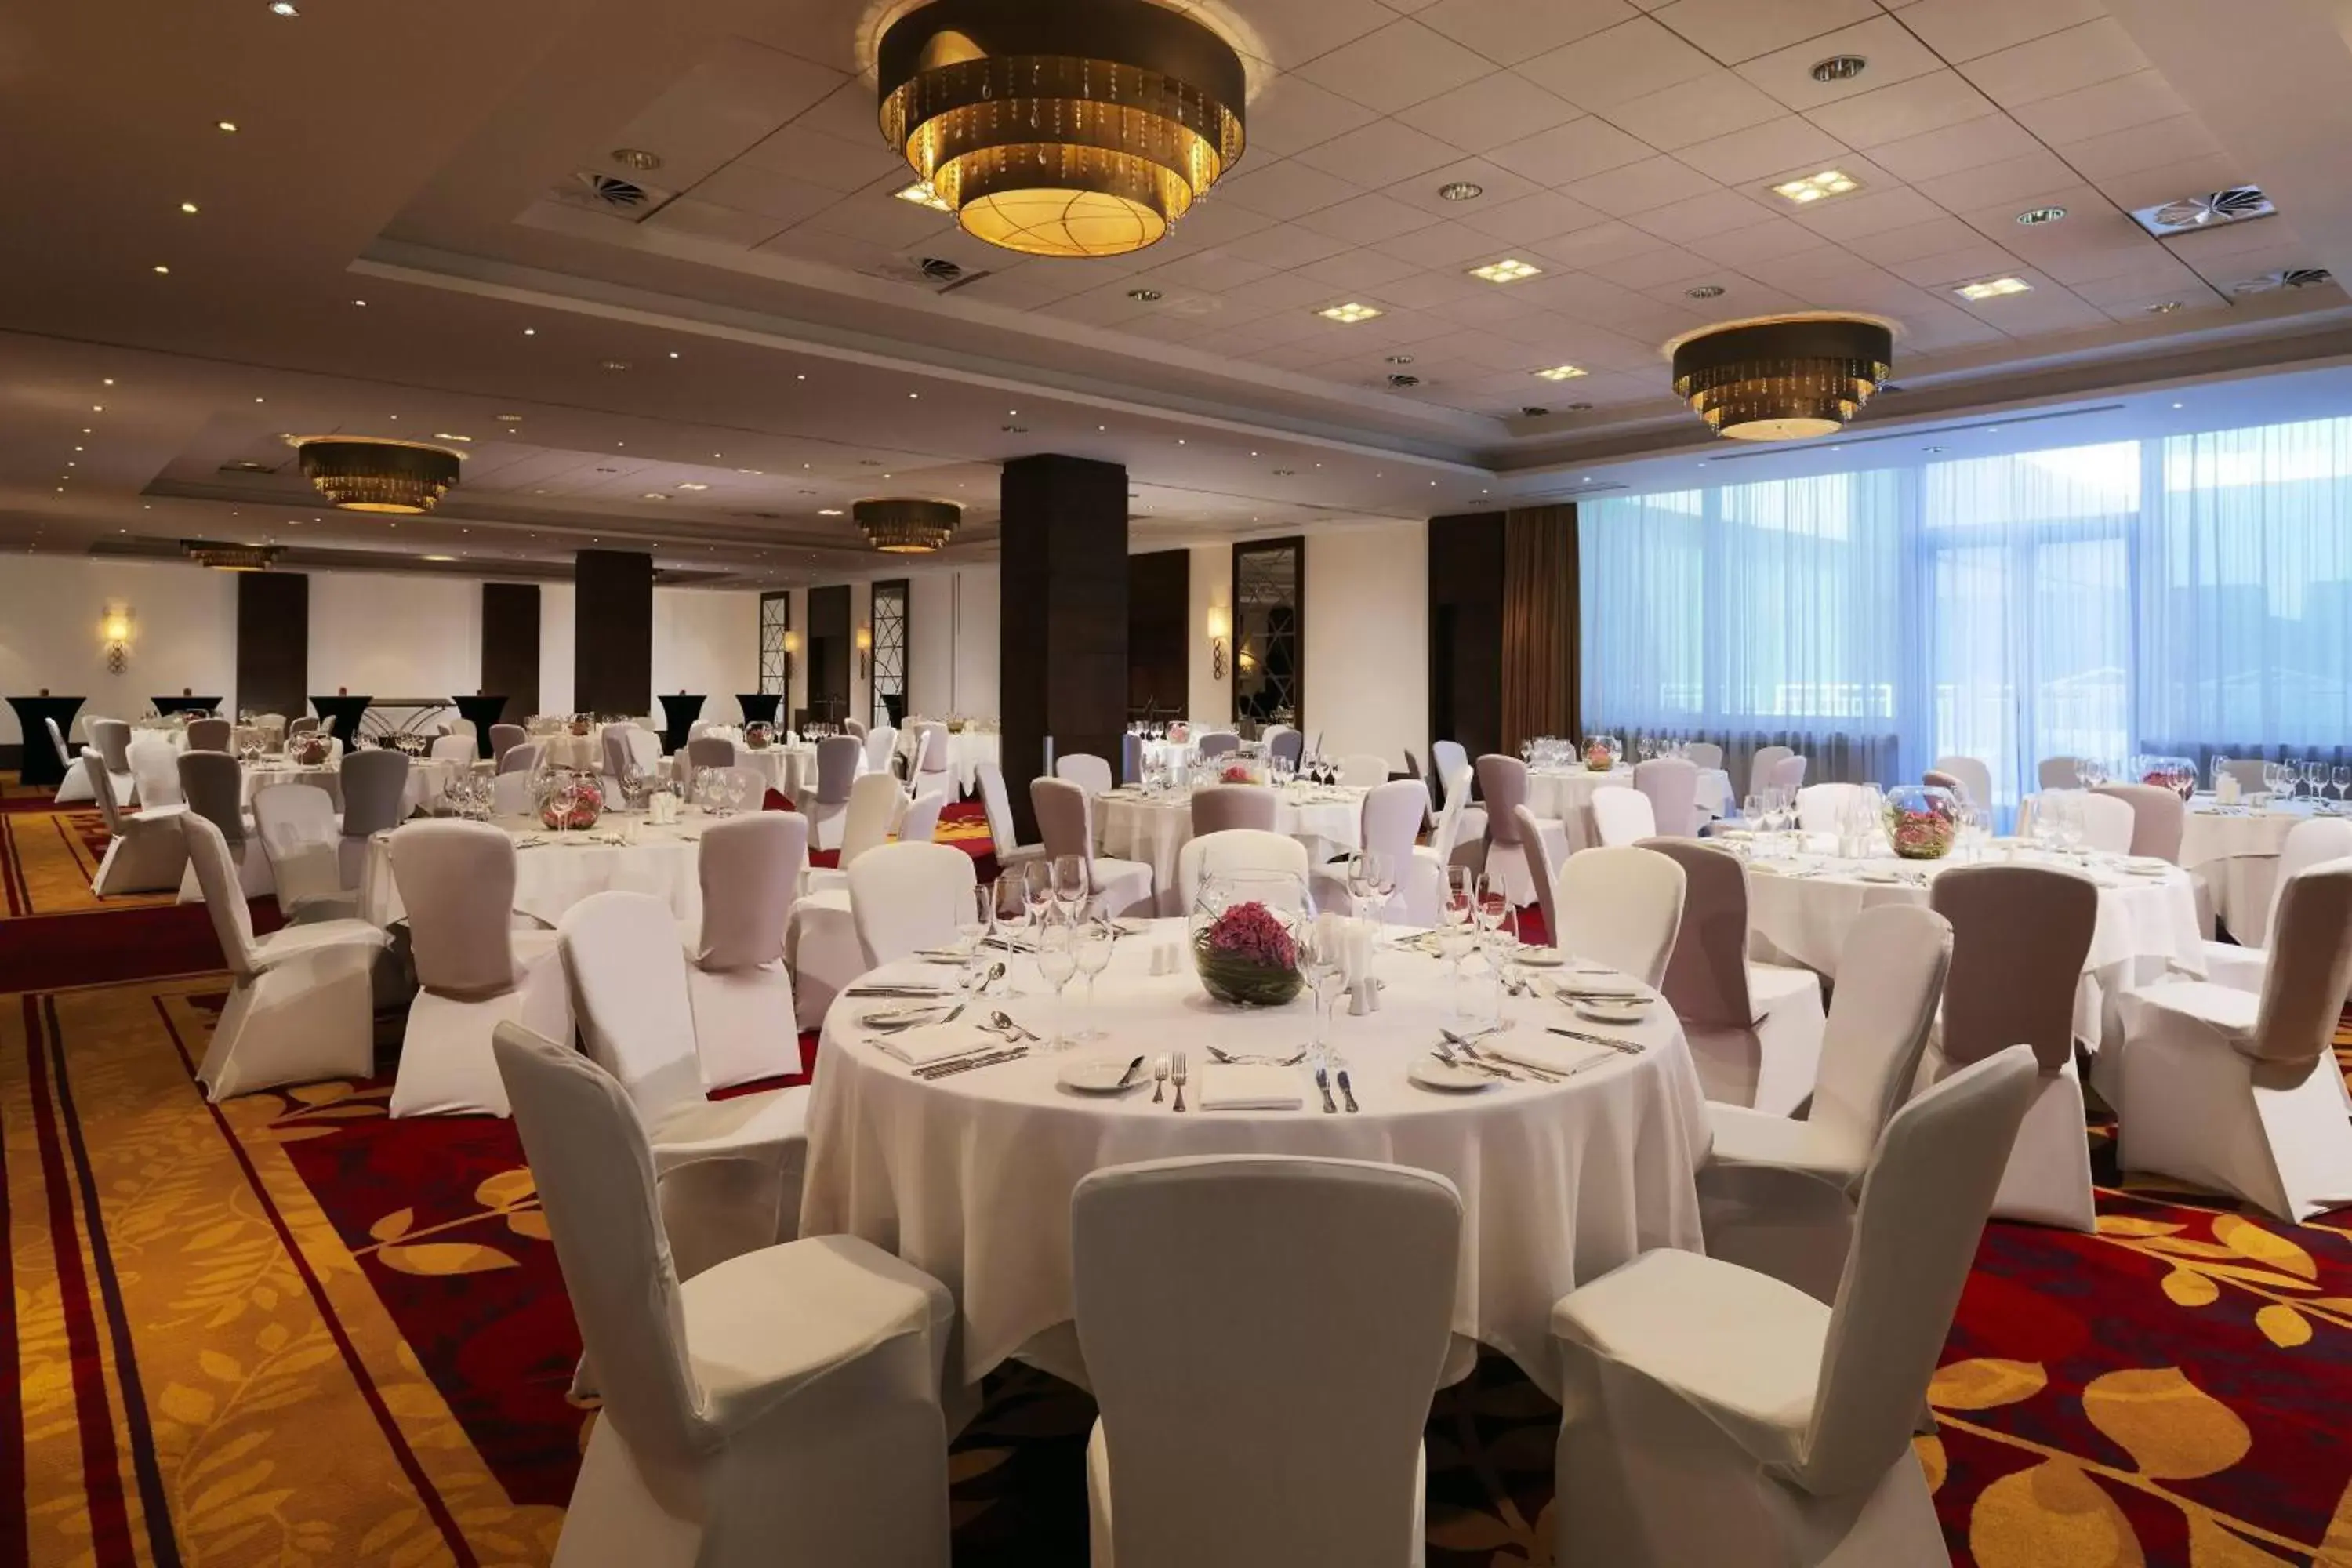 Meeting/conference room, Banquet Facilities in Warsaw Marriott Hotel